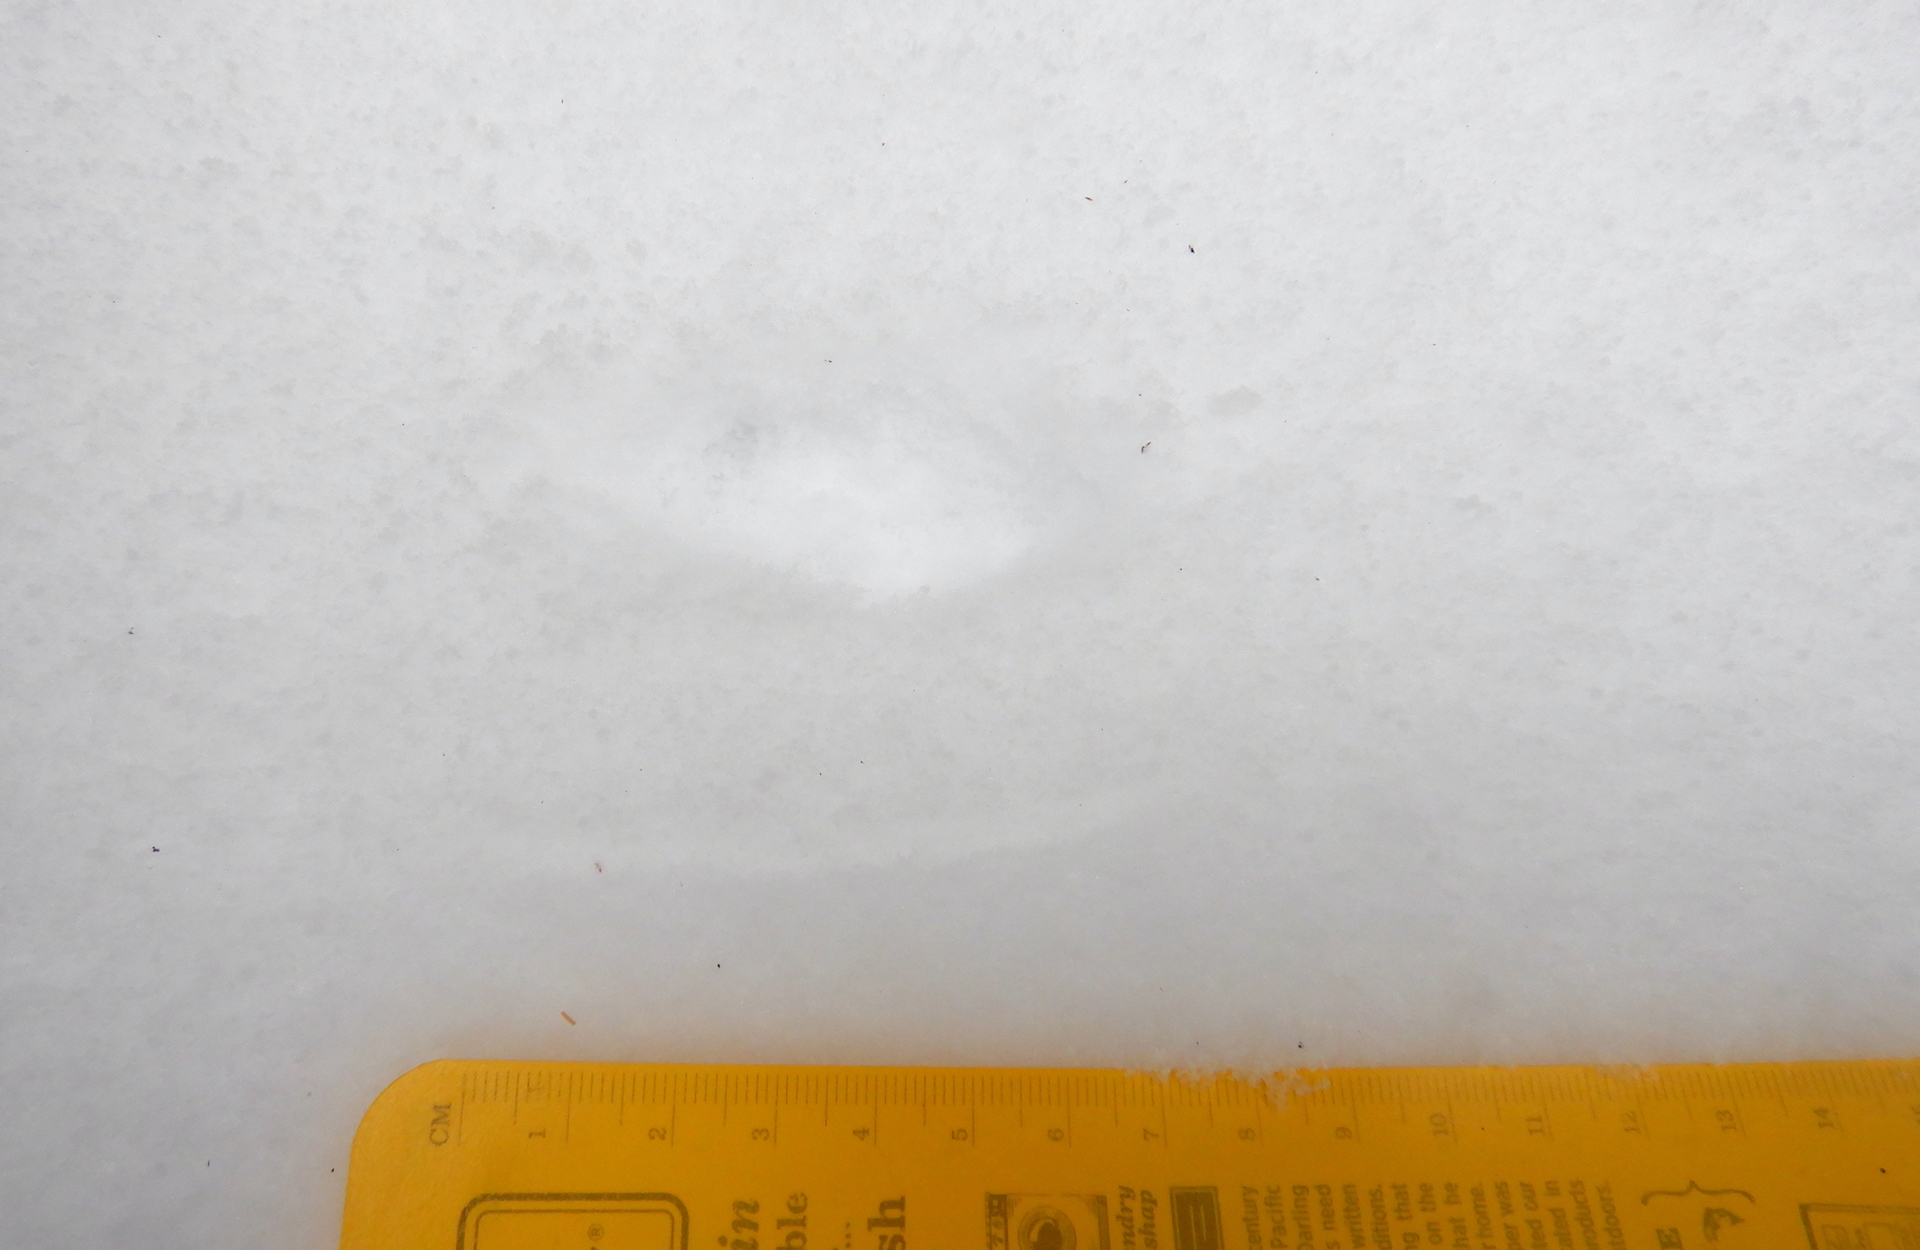 A single set of long-tailed weasel tracks. They make a single depression in snow in the center of the photo. A light slash is visible beneath the weasel prints. The width of the yellow notebook at bottom is about 15 cm.